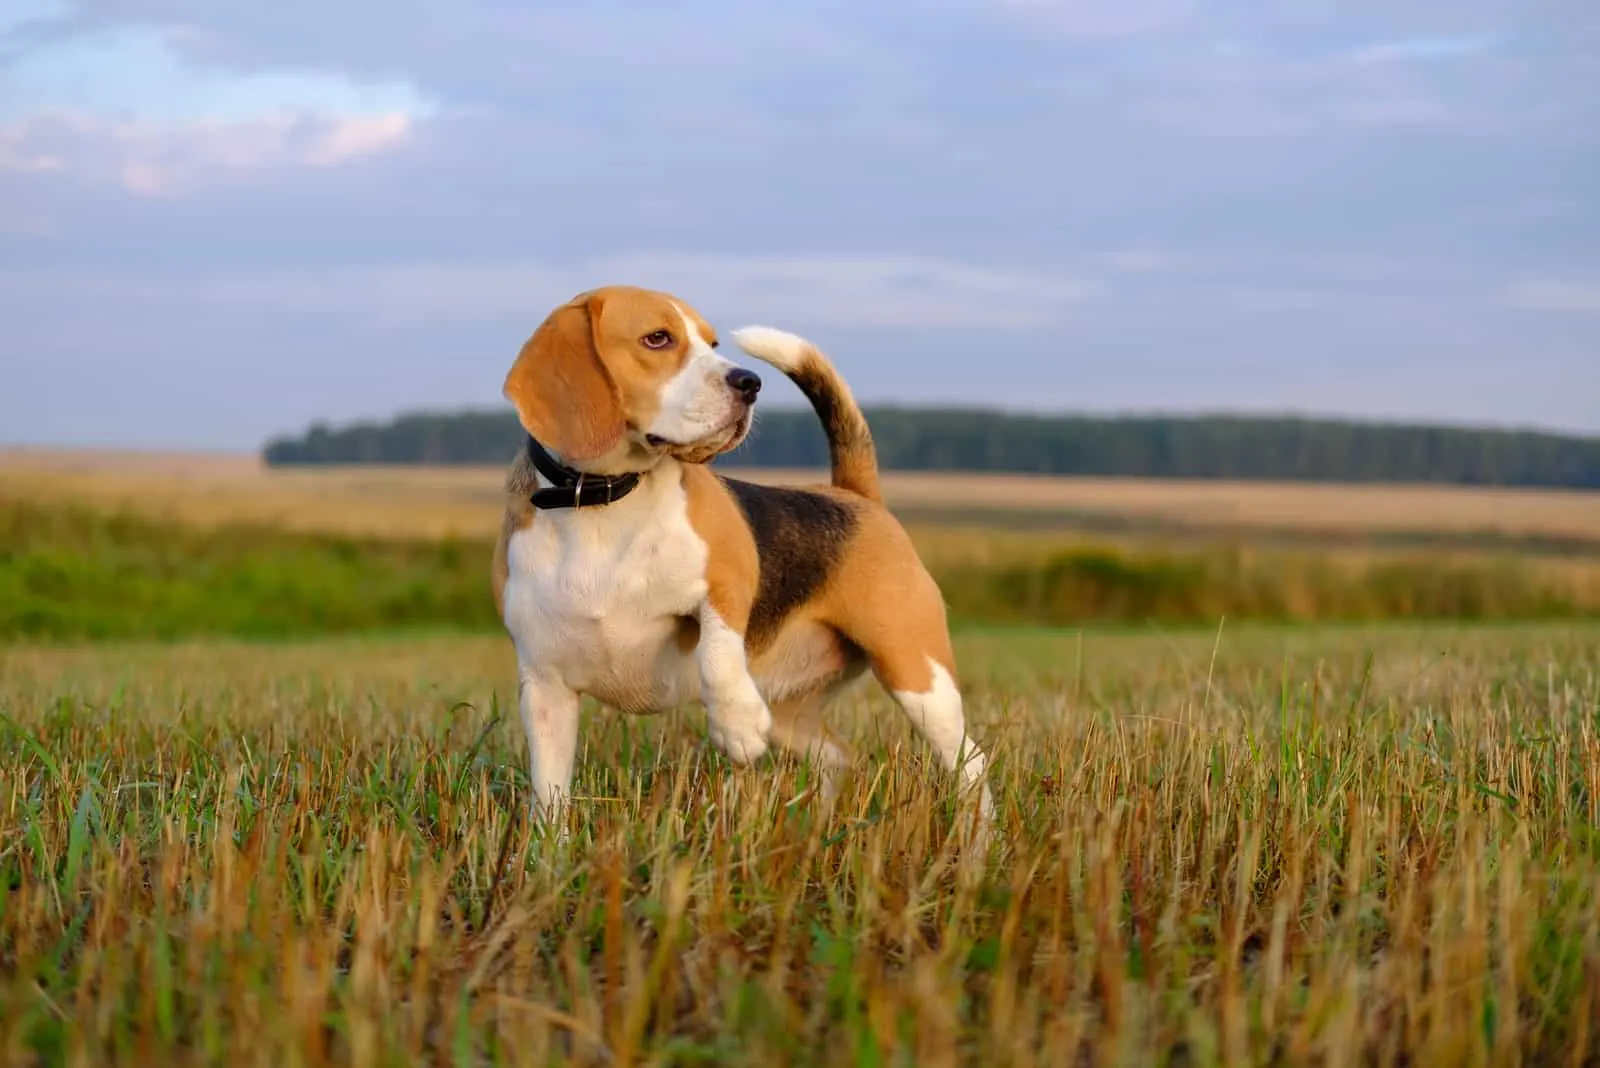 Beagle on a walk early in the morning at sunrise